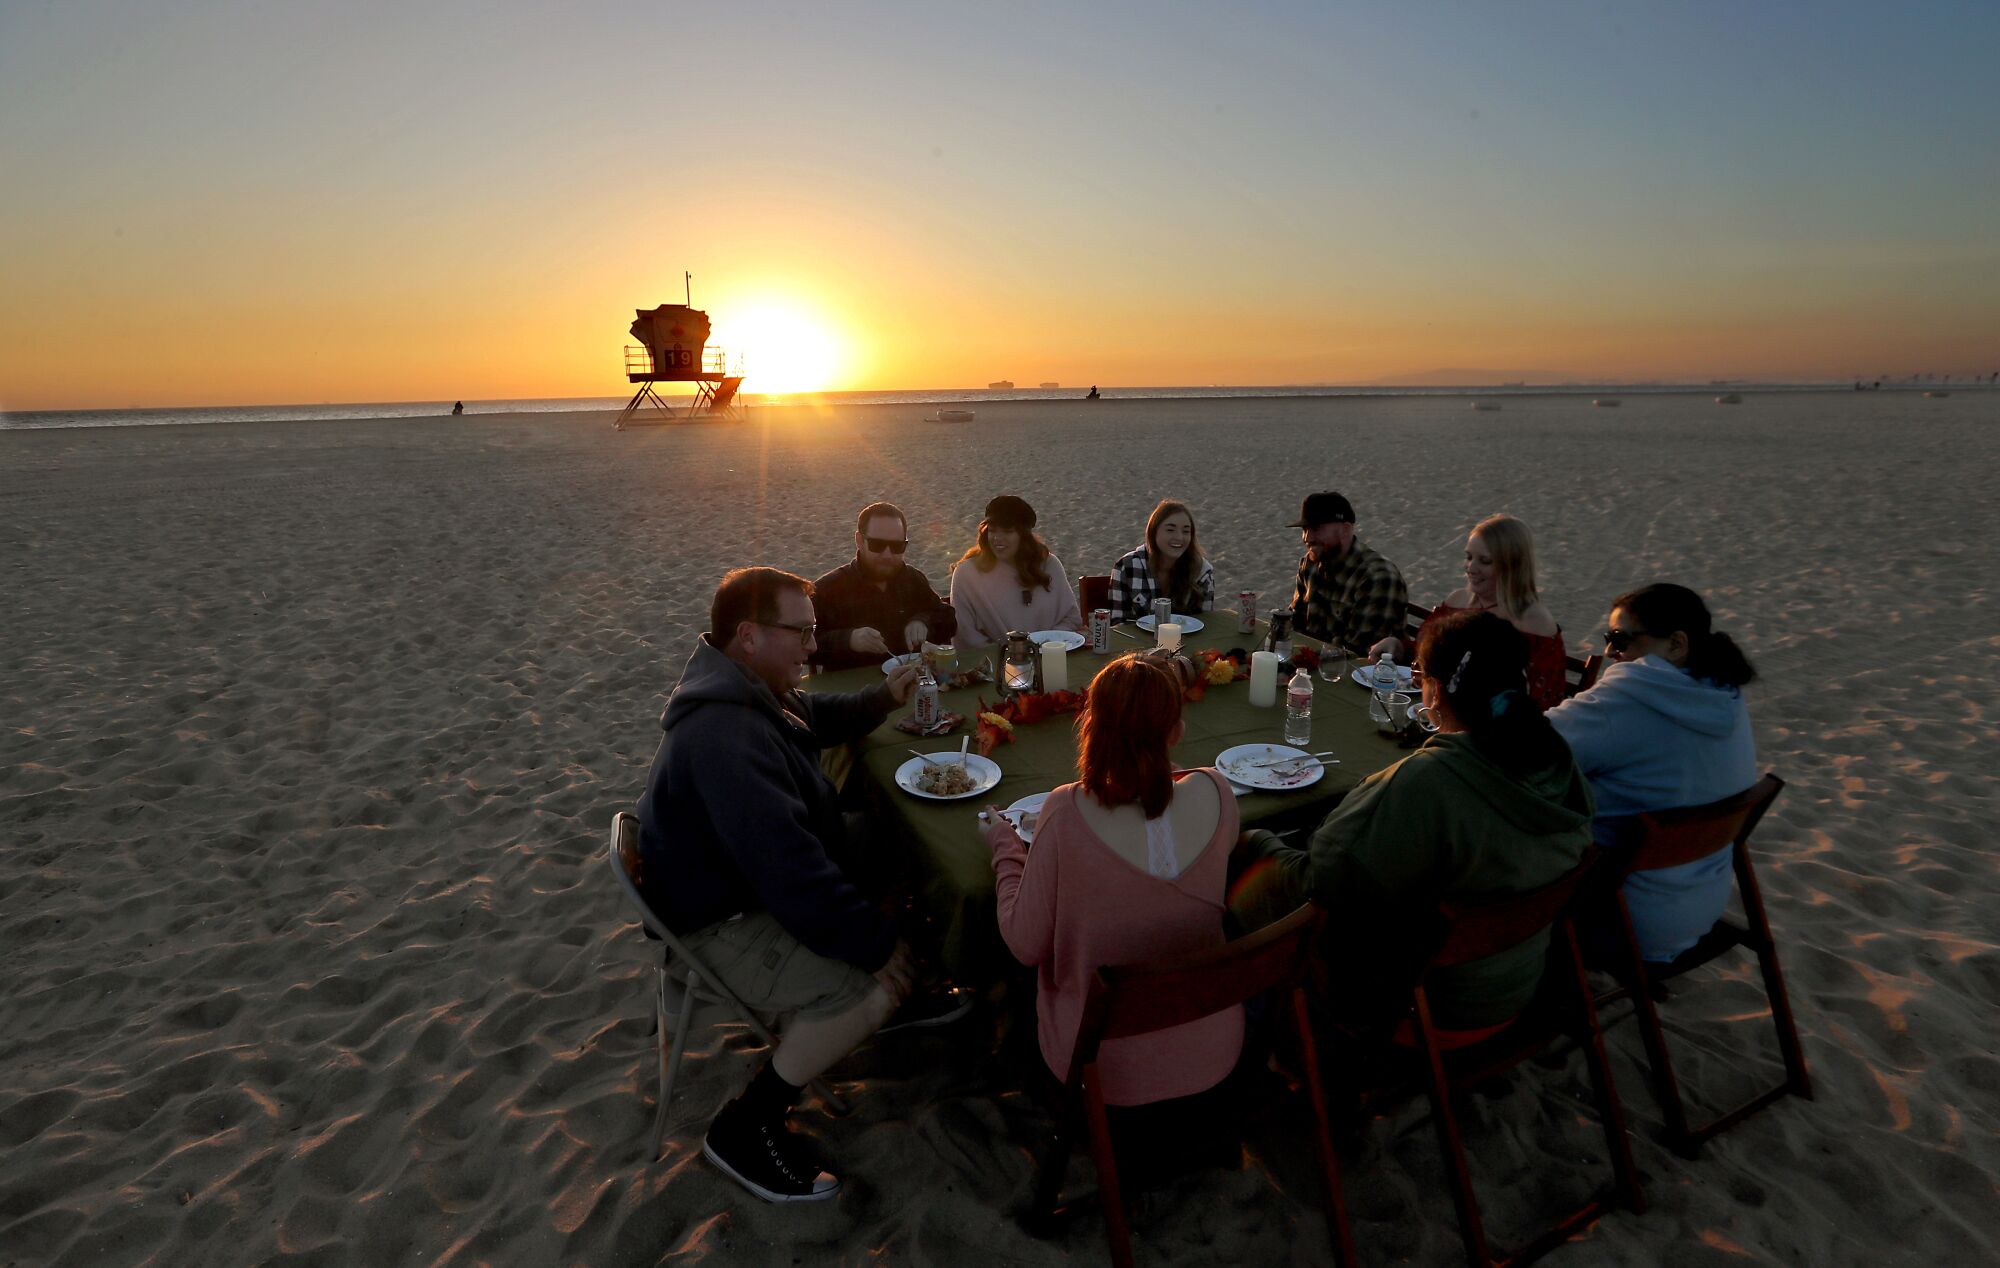 Nine people sit behind plates of food at a round table on the sand. In the background, the sun sets behind a lifeguard tower.